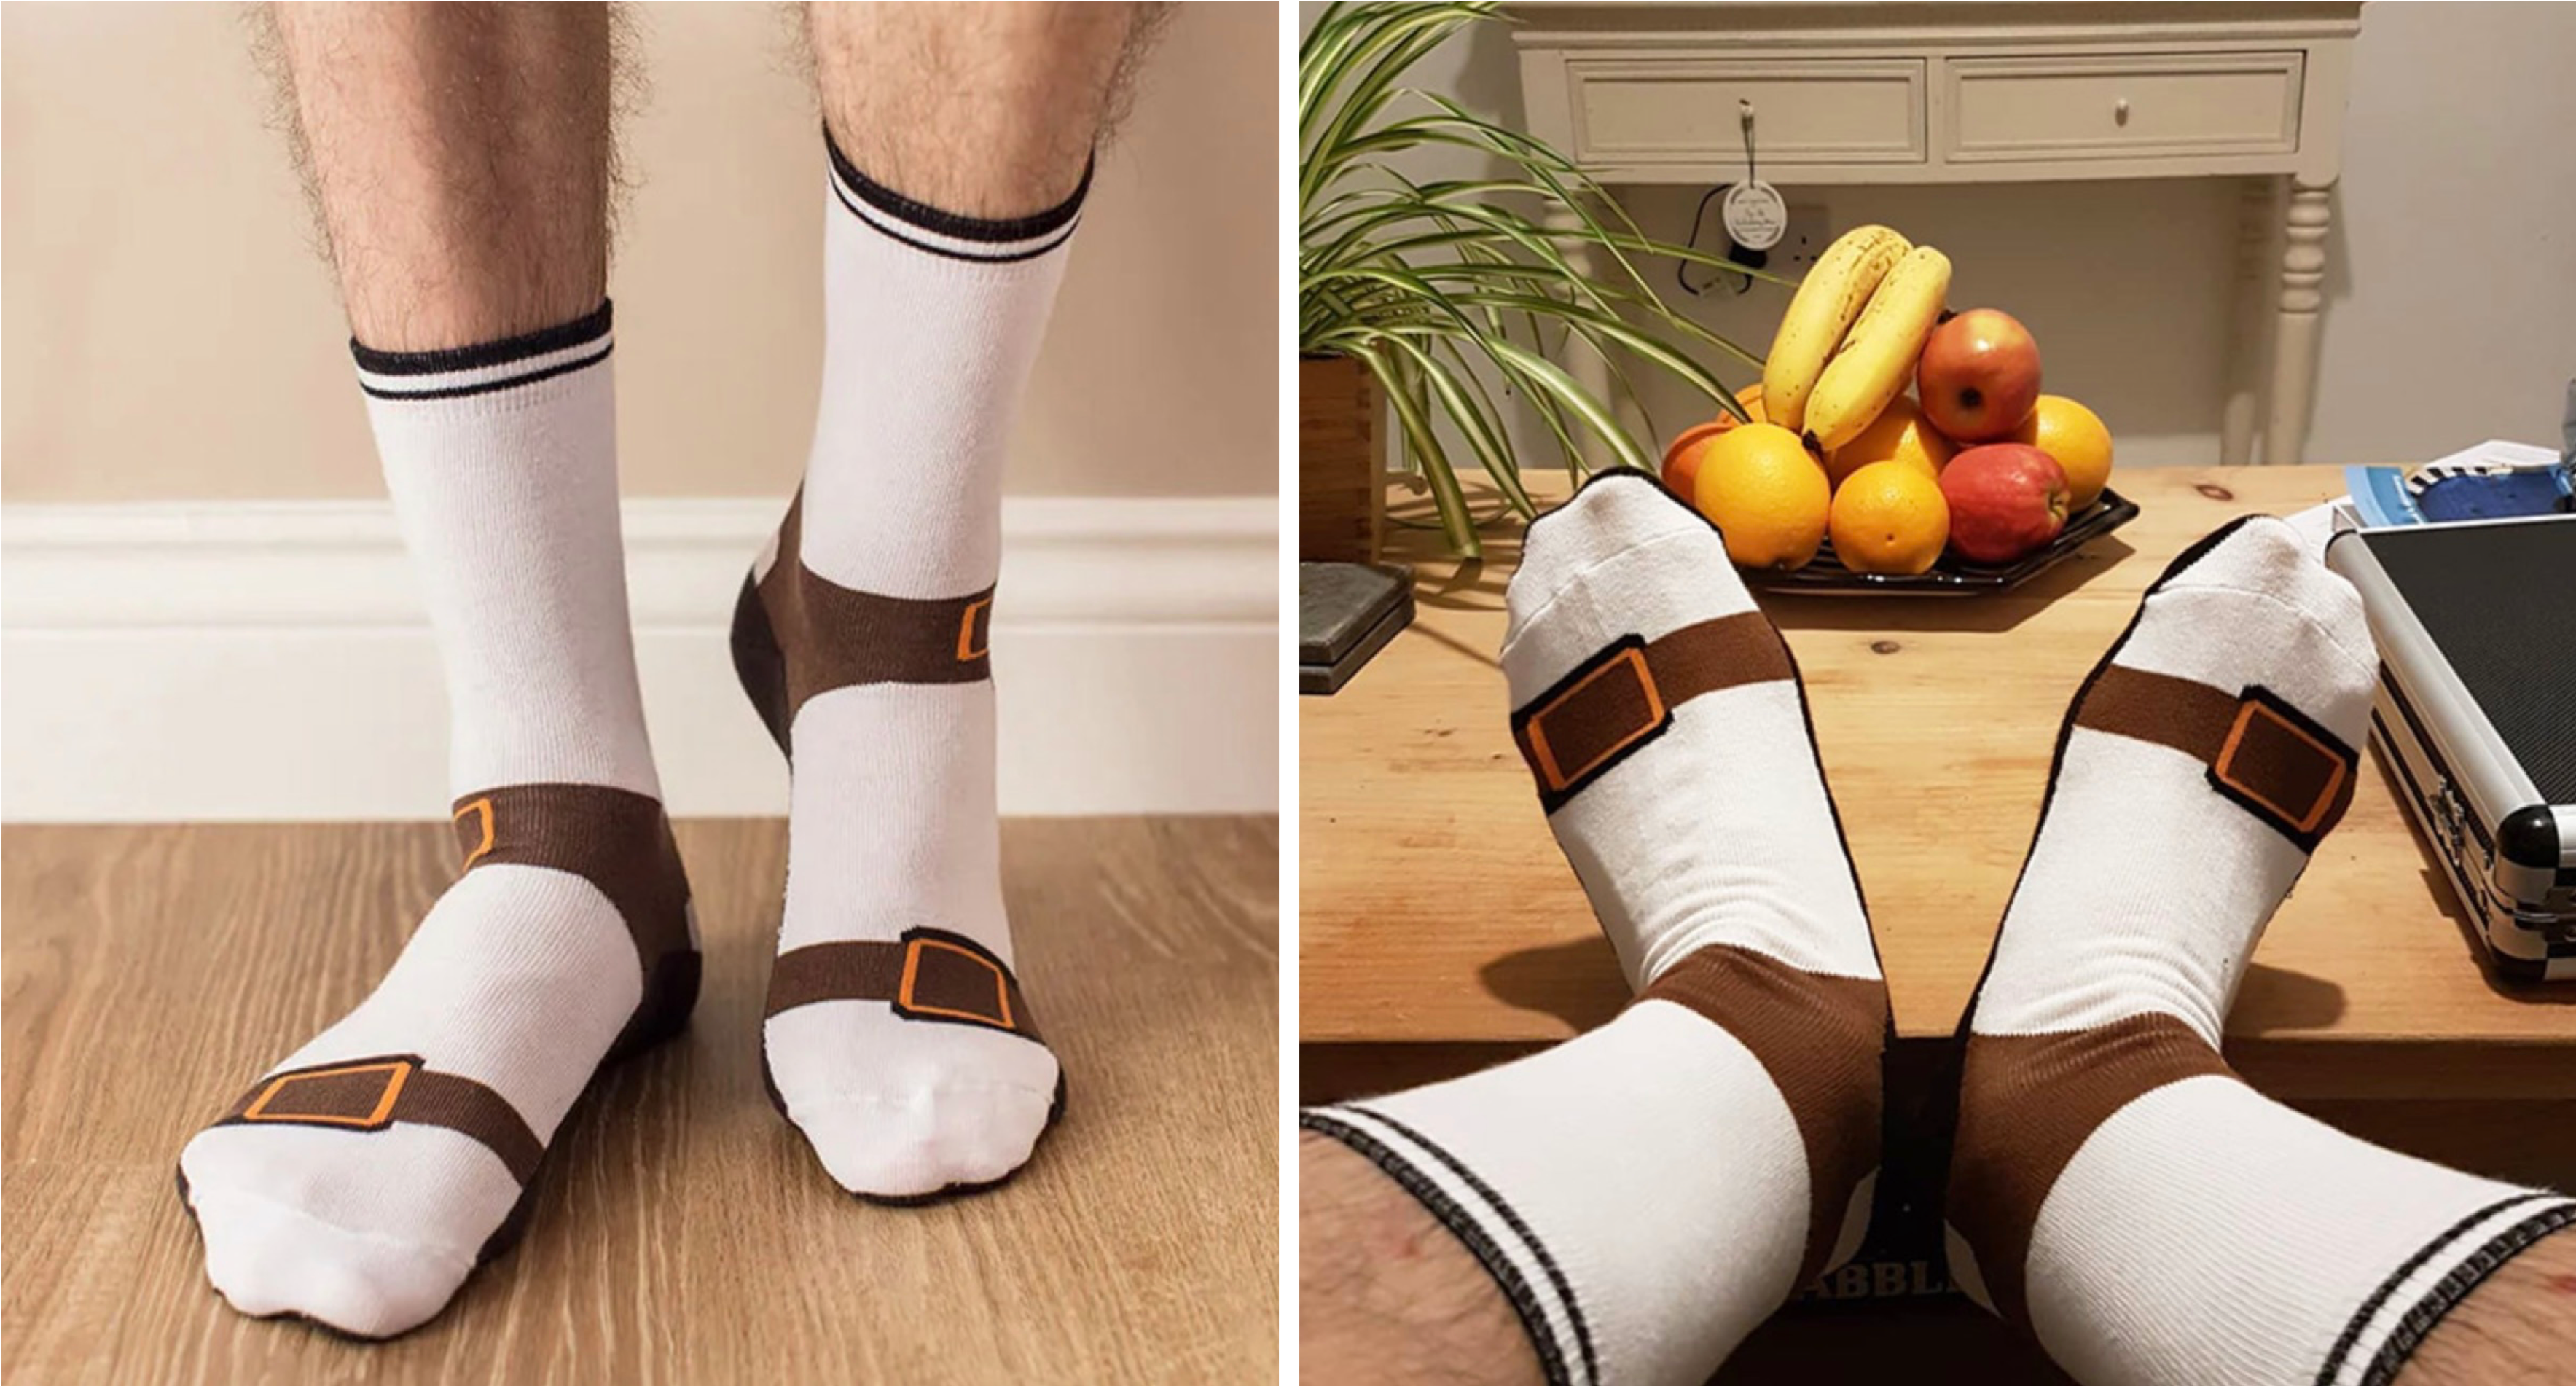 Finally, Socks That Look Like You're Wearing Socks With Sandals